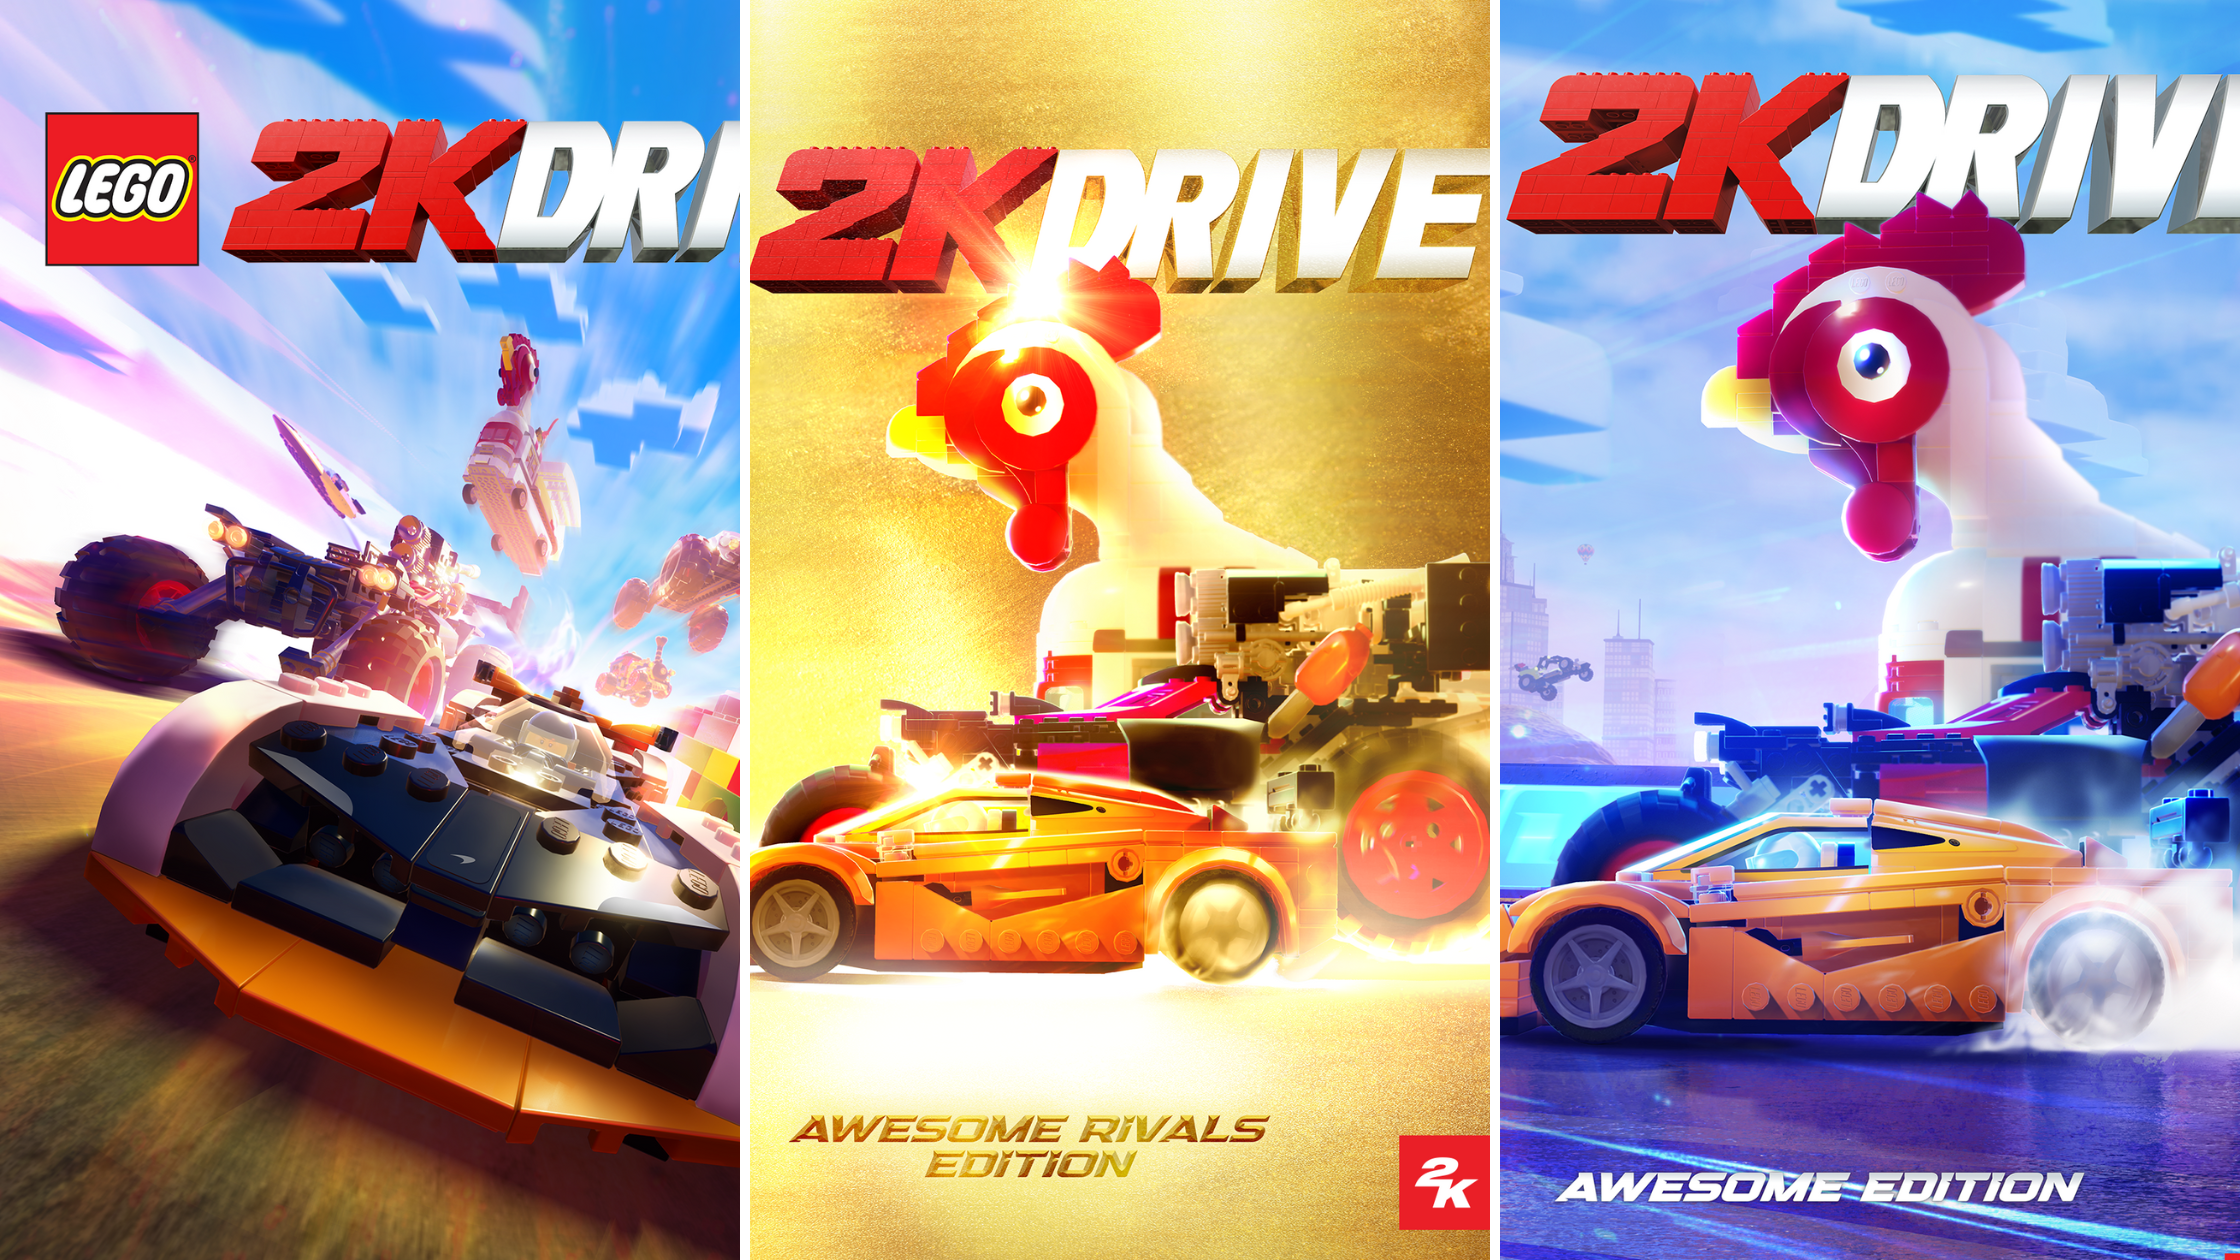 LEGO 2K Drive looks slick but sets a dangerous and predatory course towards  microtransaction hell - Jay\'s Brick Blog